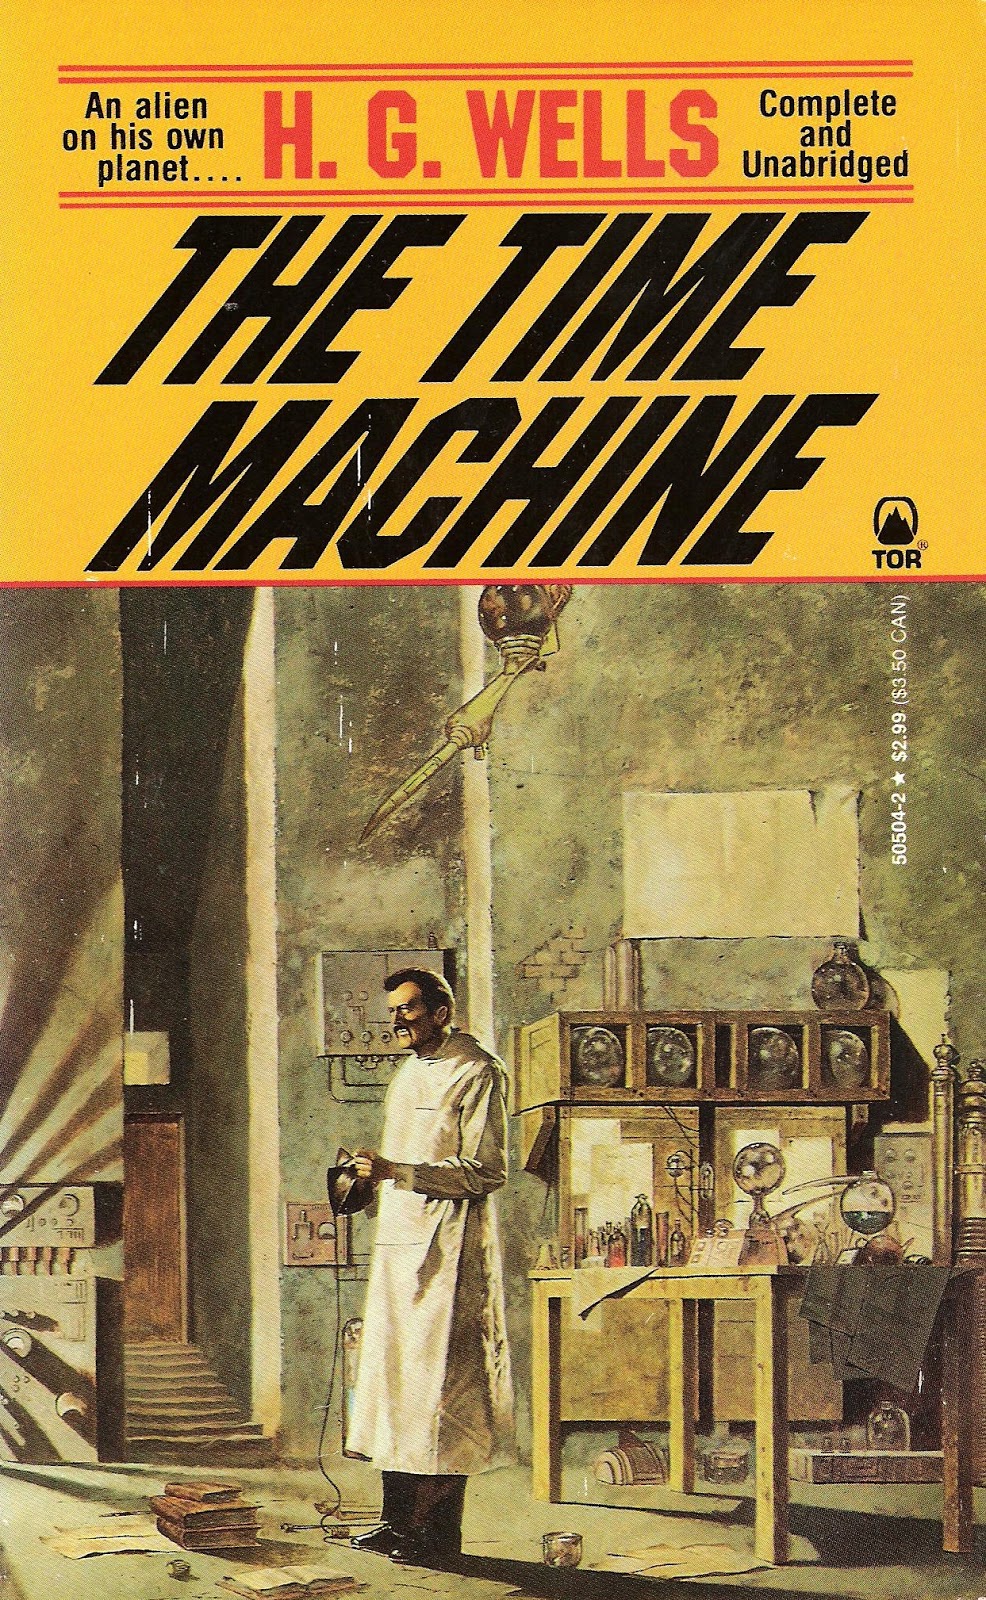 Time Machines through the Ages – Victorian Science Fiction